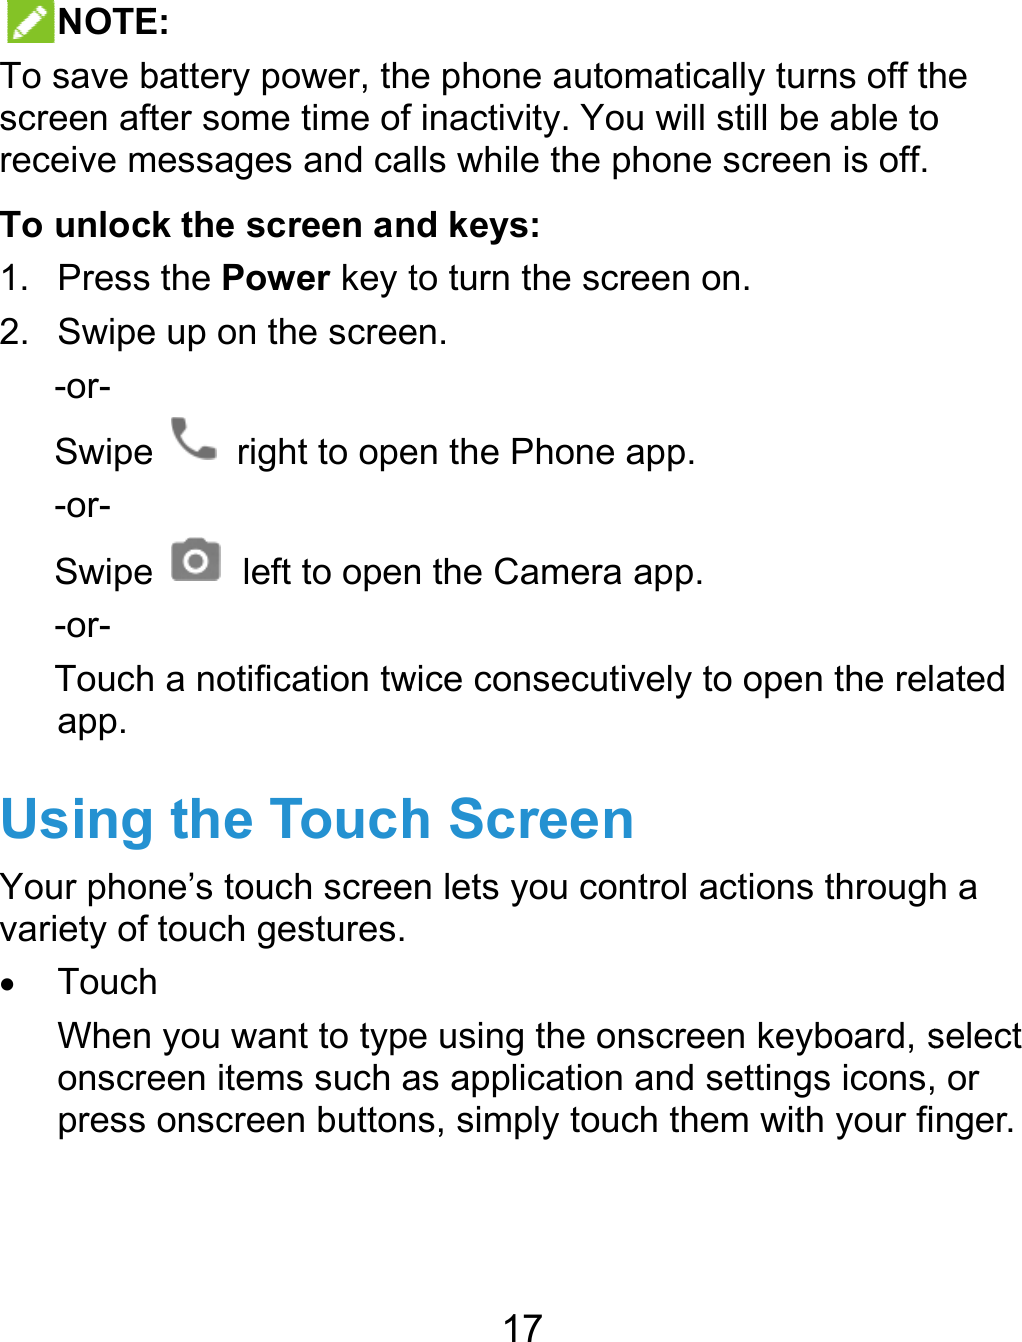  NOTETo save bscreen aftreceive mTo unloc1. Press2. Swipe-or- Swipe-or- Swipe-or- Touchapp. UsingYour phonvariety of  TouchWhenonscrepress   E:  battery power, thfter some time of messages and cak the screen an the Power key te up on the screee  right to opee    left to openh a notification twg the Touchne’s touch screetouch gestures.h  you want to typeeen items such aonscreen button17 e phone automafinactivity. You wlls while the phond keys: to turn the screeen. en the Phone appn the Camera apwice consecutivelh Screenn lets you controe using the onscas application anns, simply touch ttically turns off thwill still be able tone screen is off.n on. p. p. y to open the relol actions throughcreen keyboard, sd settings icons,them with your fihe o ated h a select  or nger. 